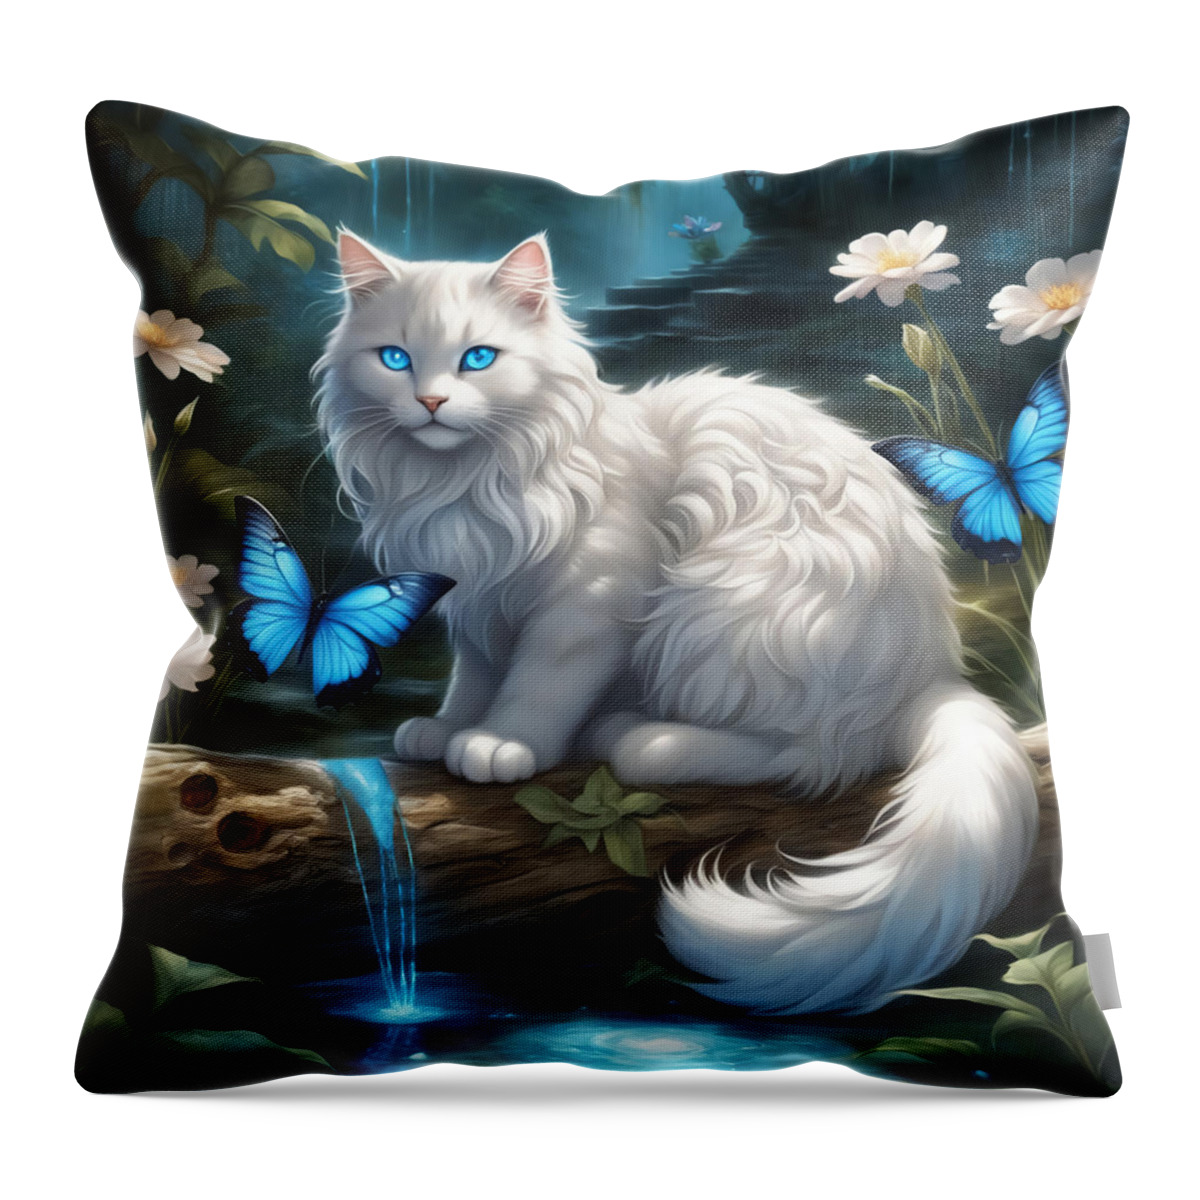 Illustration Throw Pillow featuring the digital art Turquoise Eyes Cat by Manjik Pictures